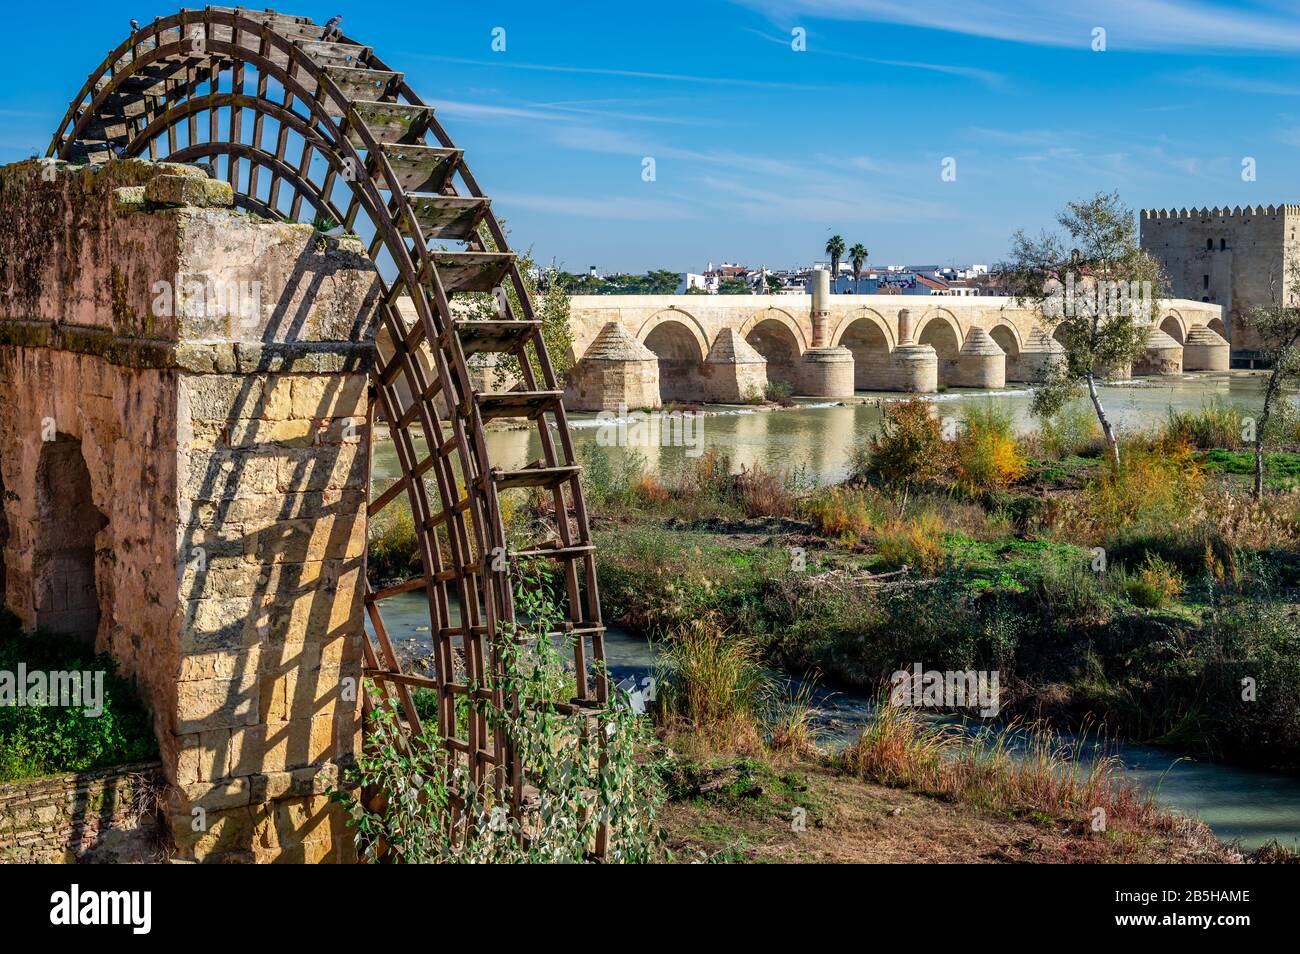 The Roman bridge and the remains of the medieval mill on the banks of the river Guadaquivir in Cordoba, Andalusia, Spain. Stock Photo